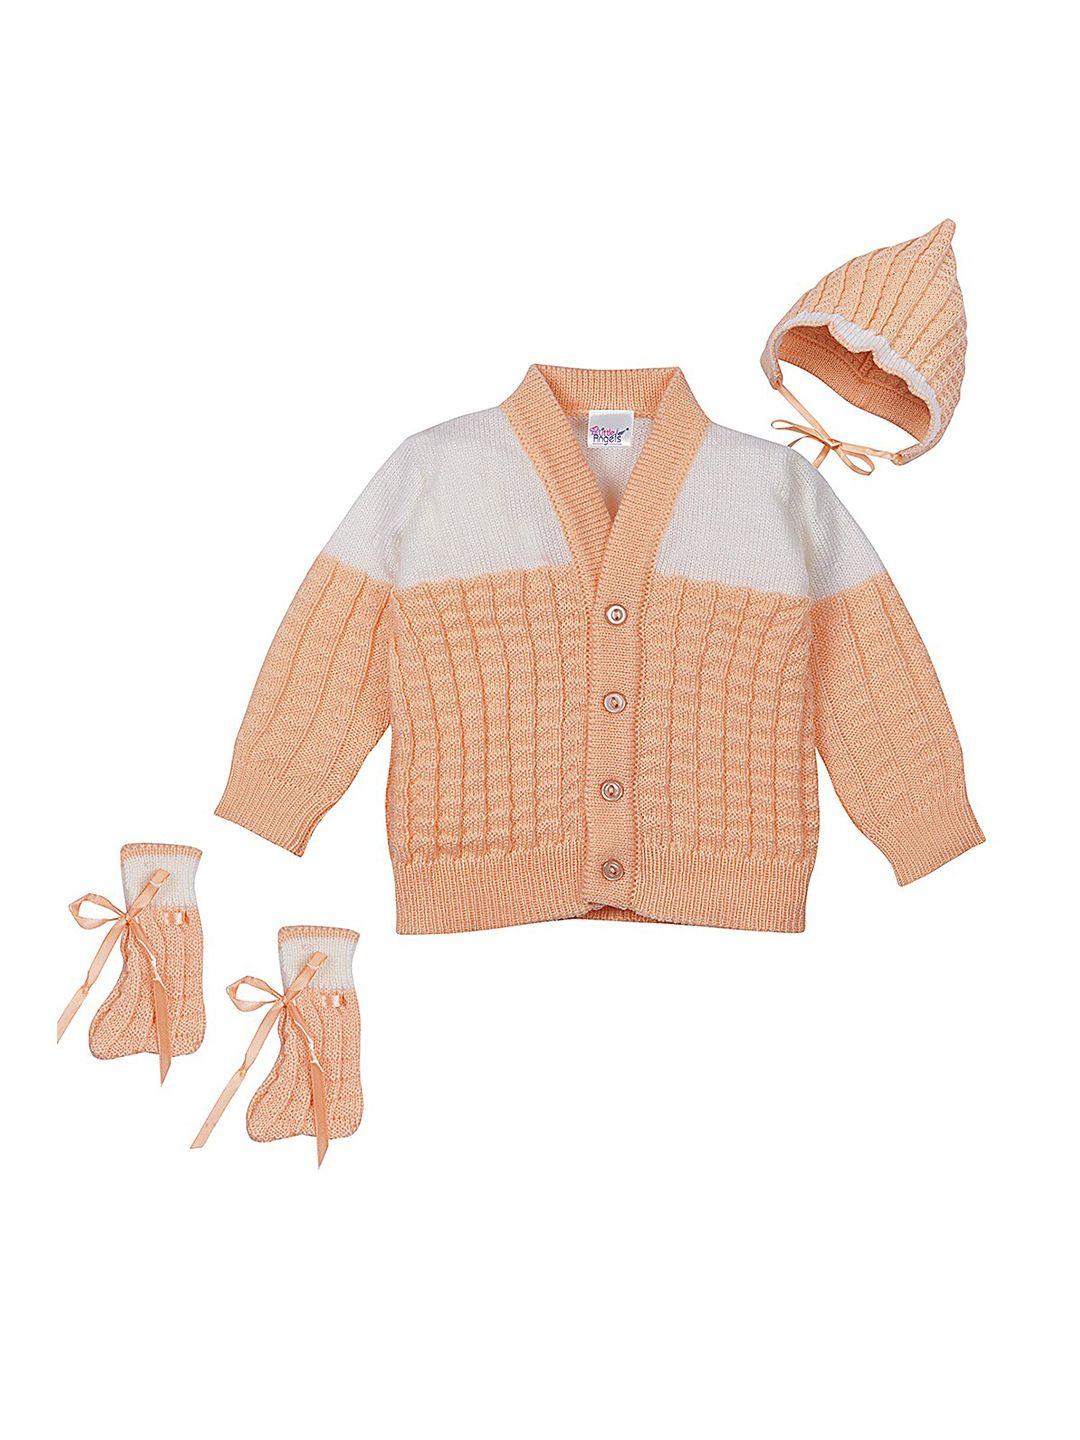 little angels unisex kids peach-coloured & white cardigan matching cap and socks